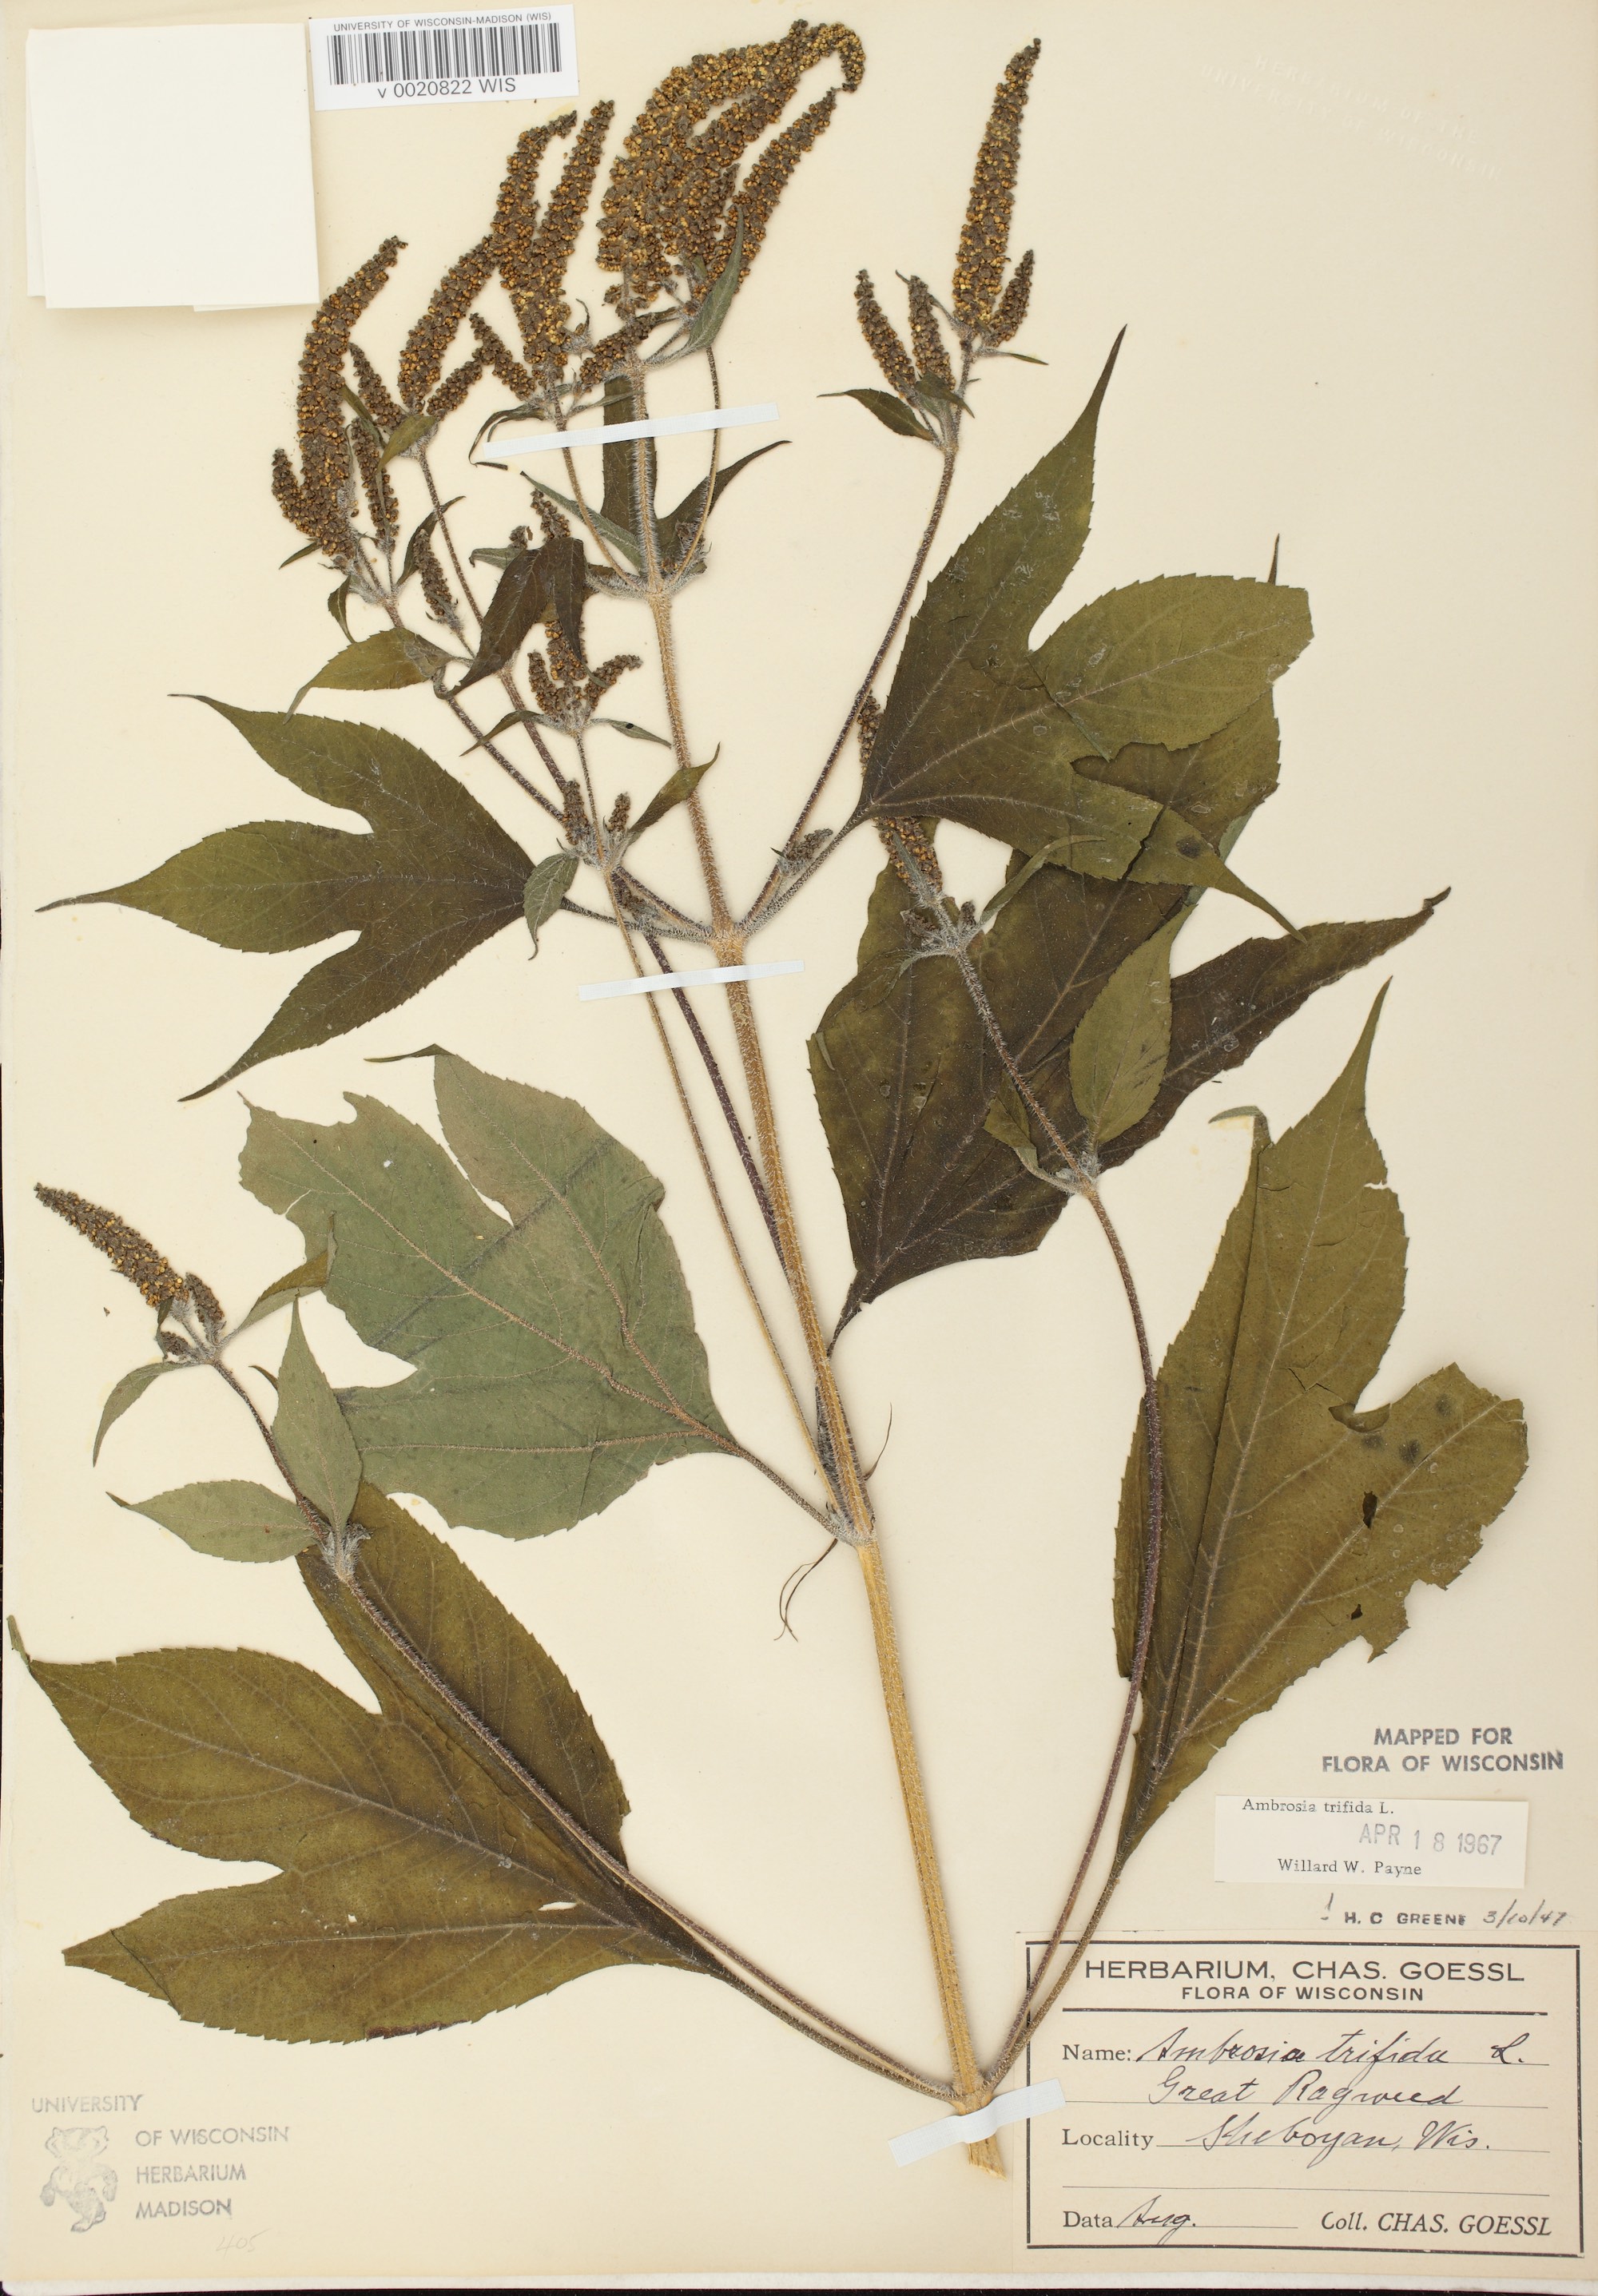 Giant Ragweed specimen collected in Sheboygan, Wisconsin in August circa 1947 circa 1947.